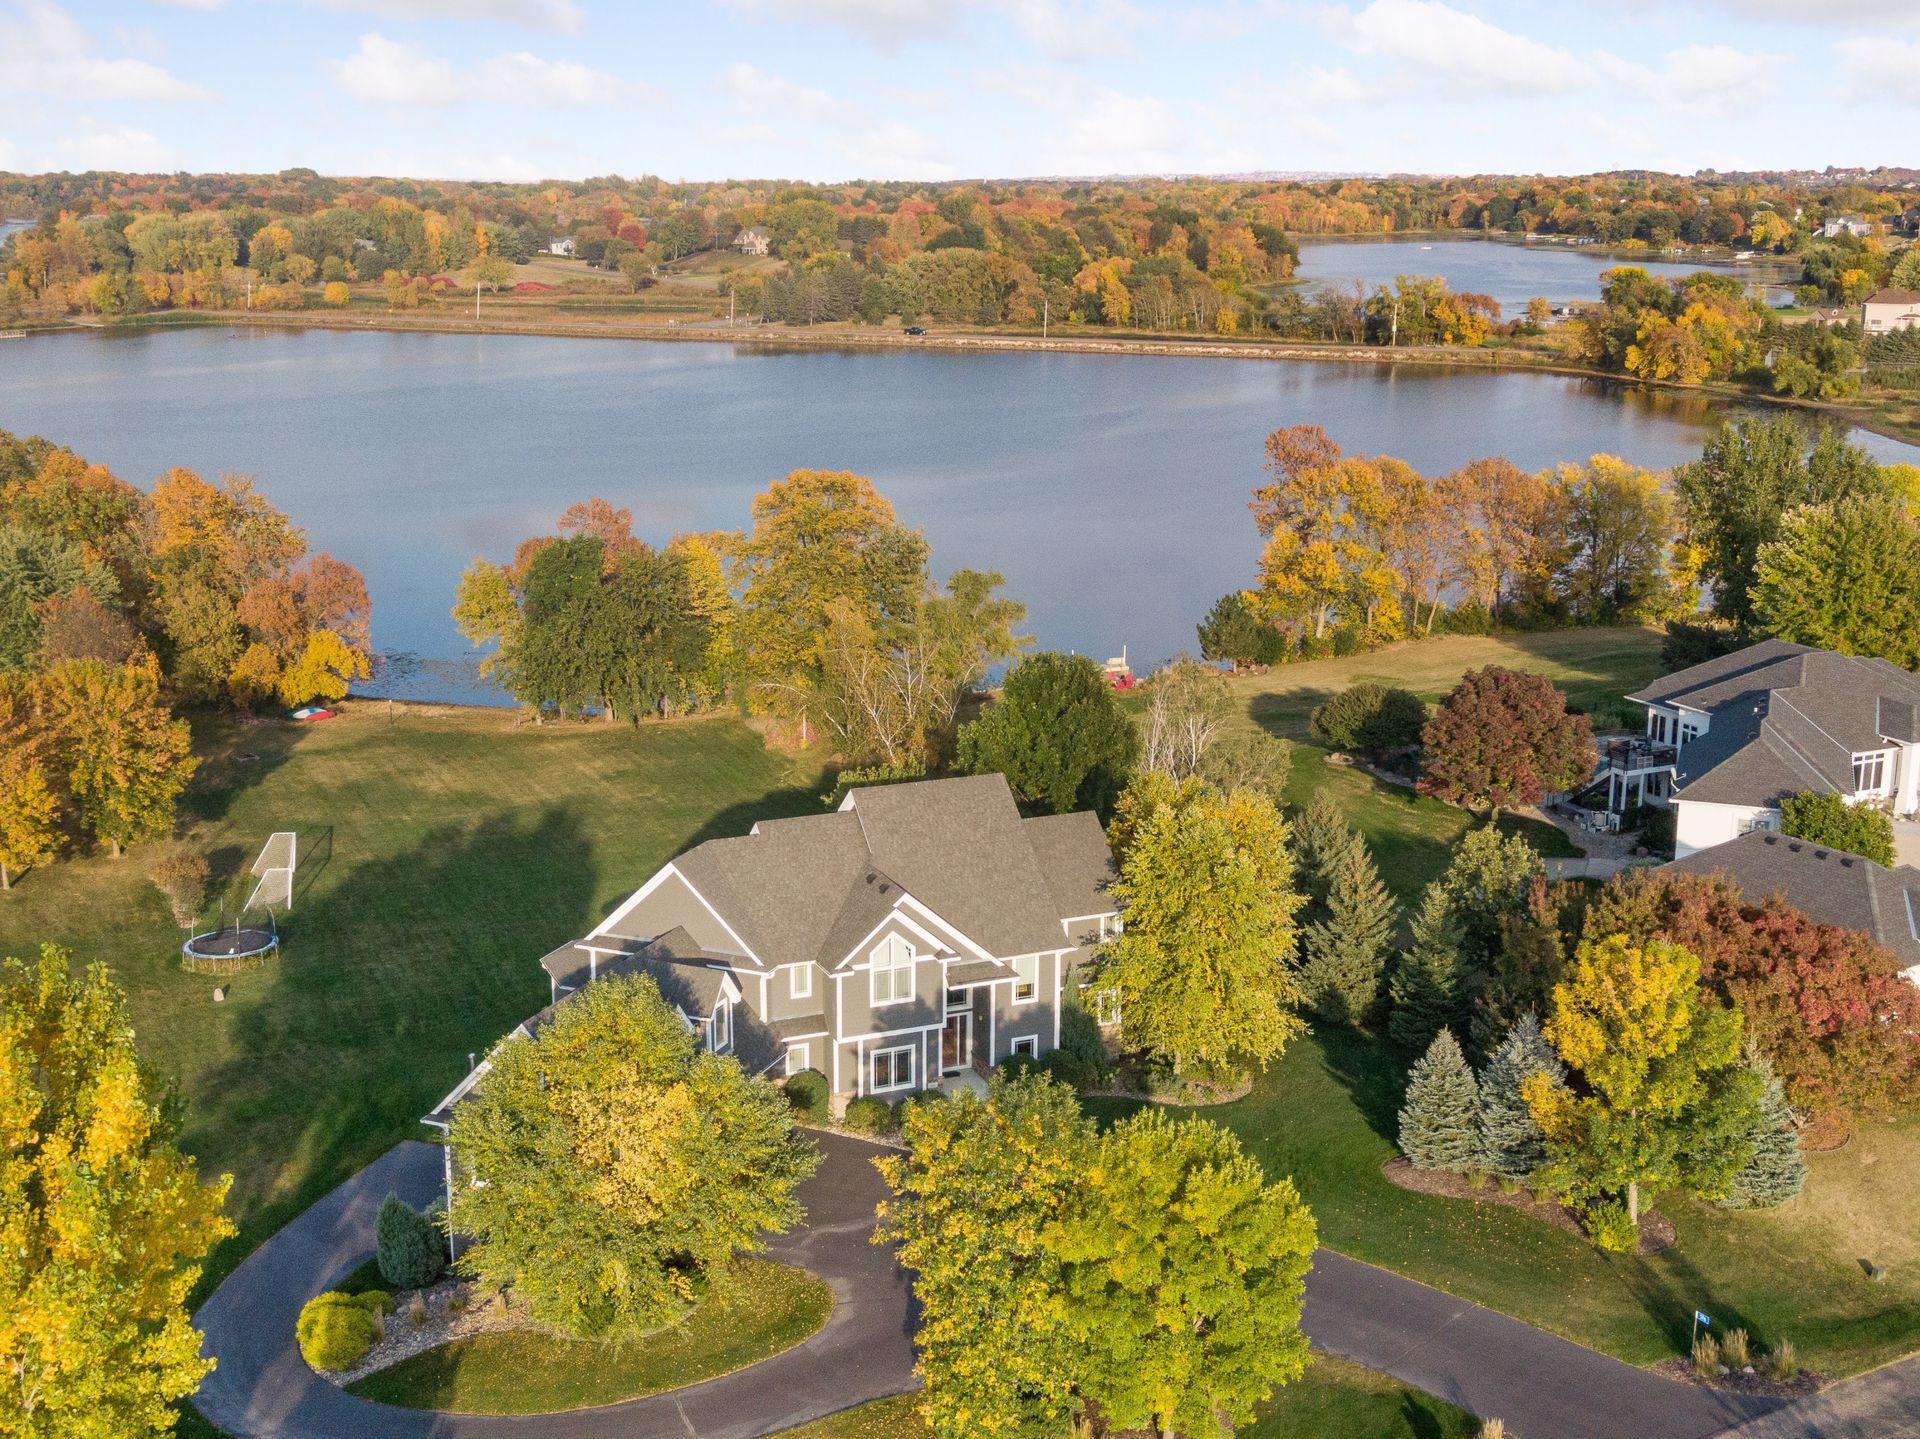 Dreaming of summer lake living?!? 3.2 acres overlooking Thole Lake in Shakopee!